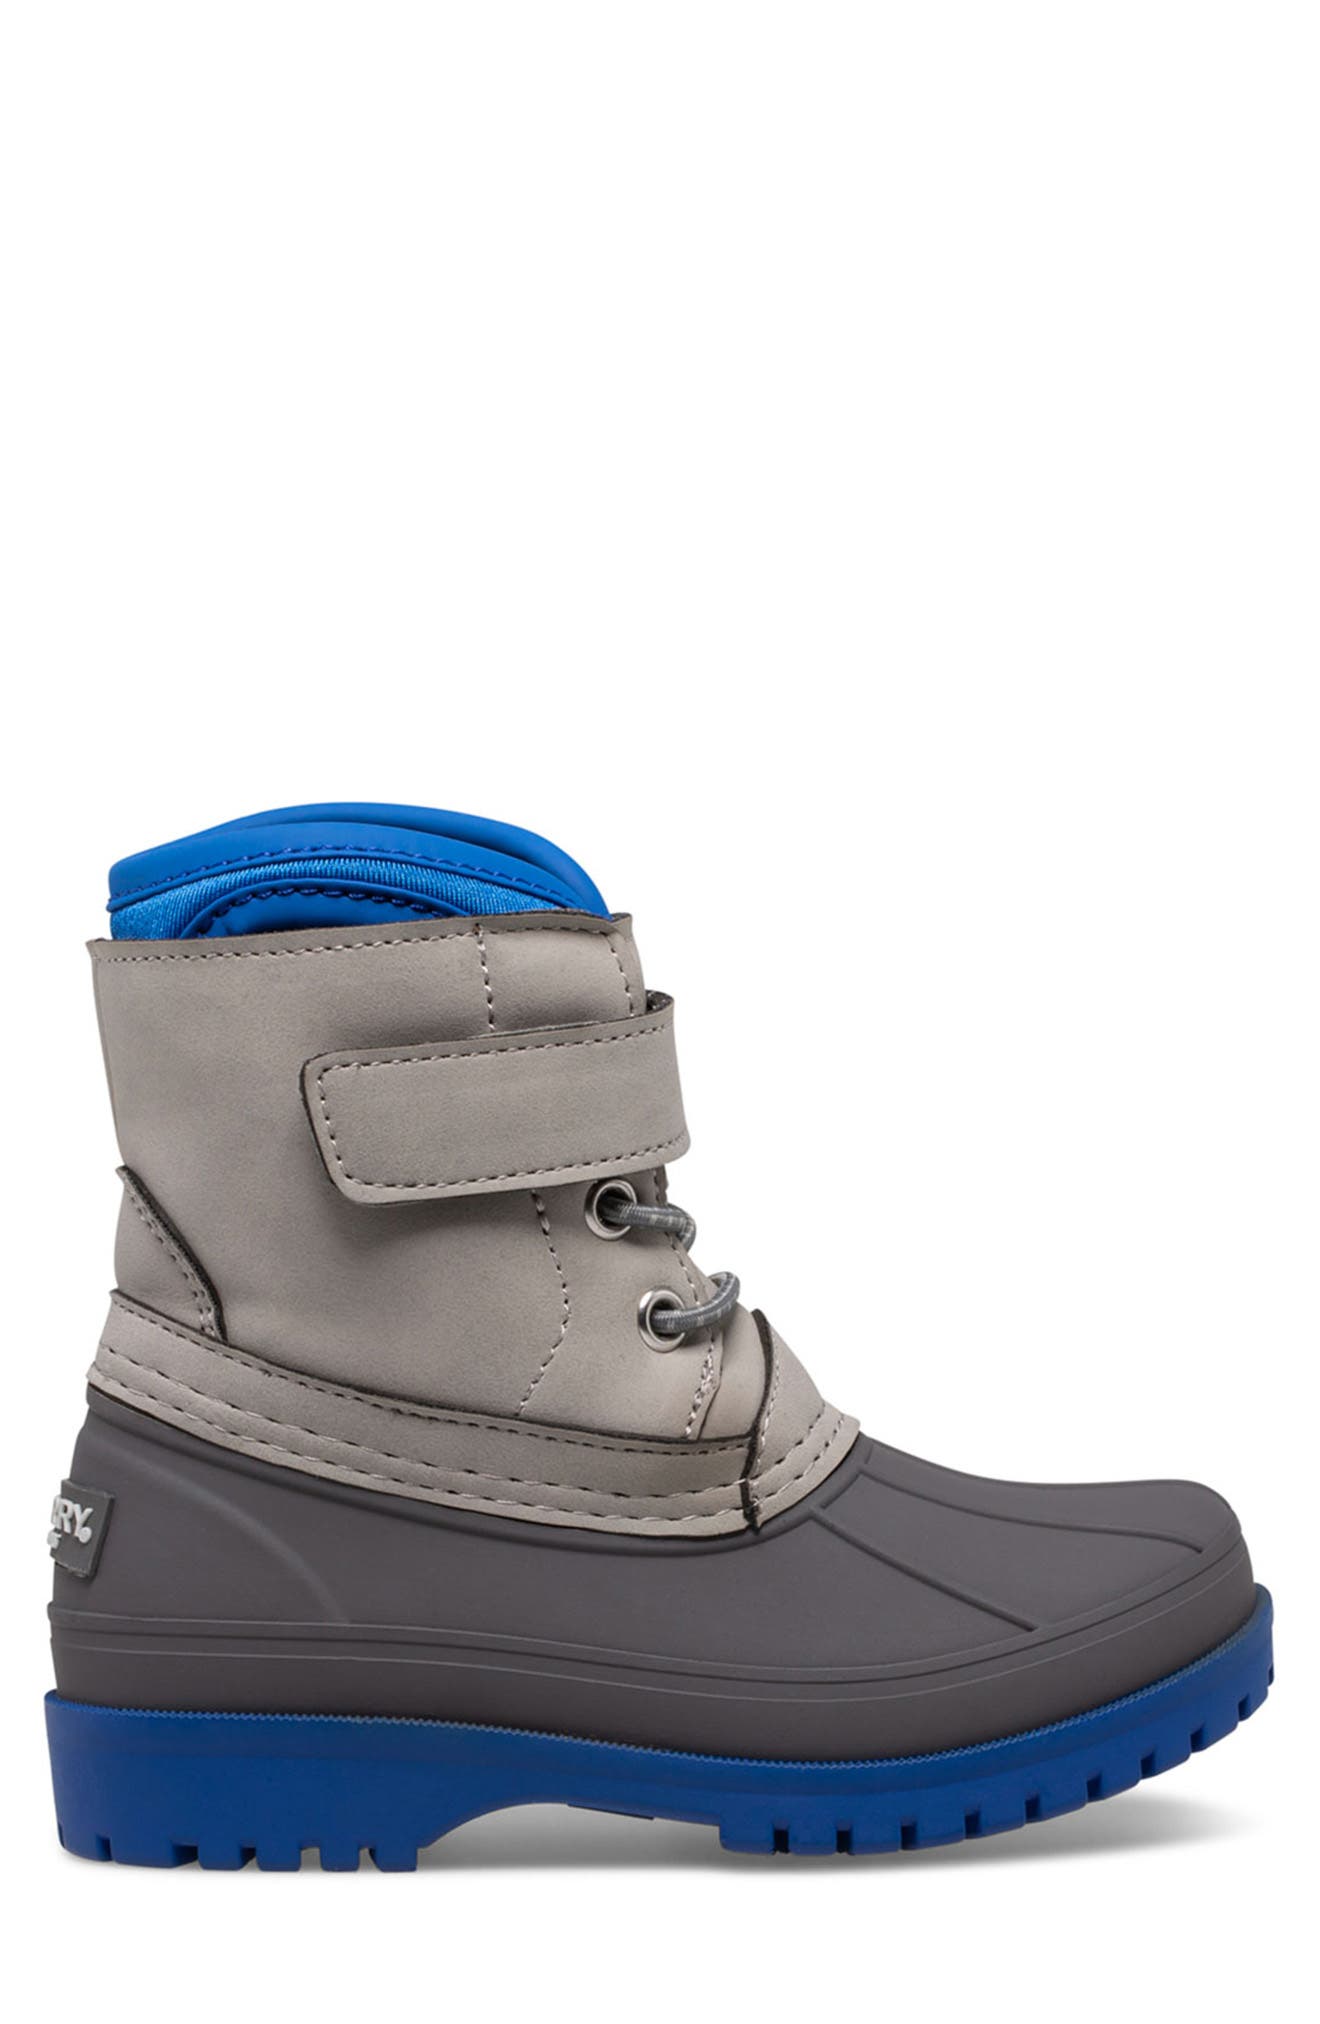 Sperry Girls Harbor A/C Boot 